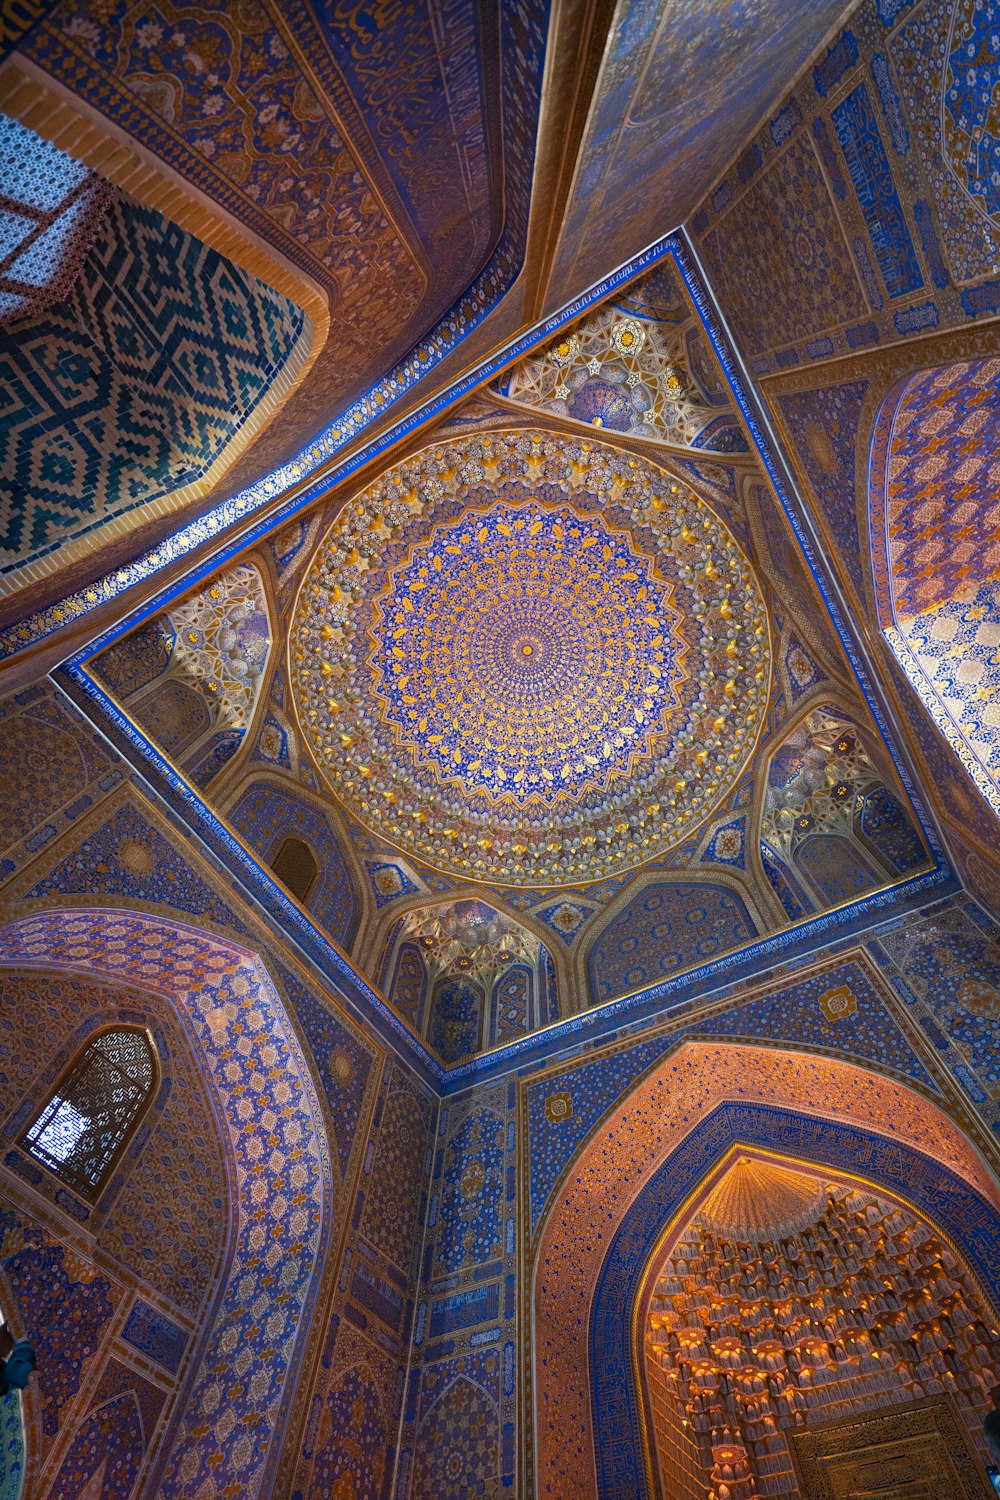 a domed ceiling with many arches